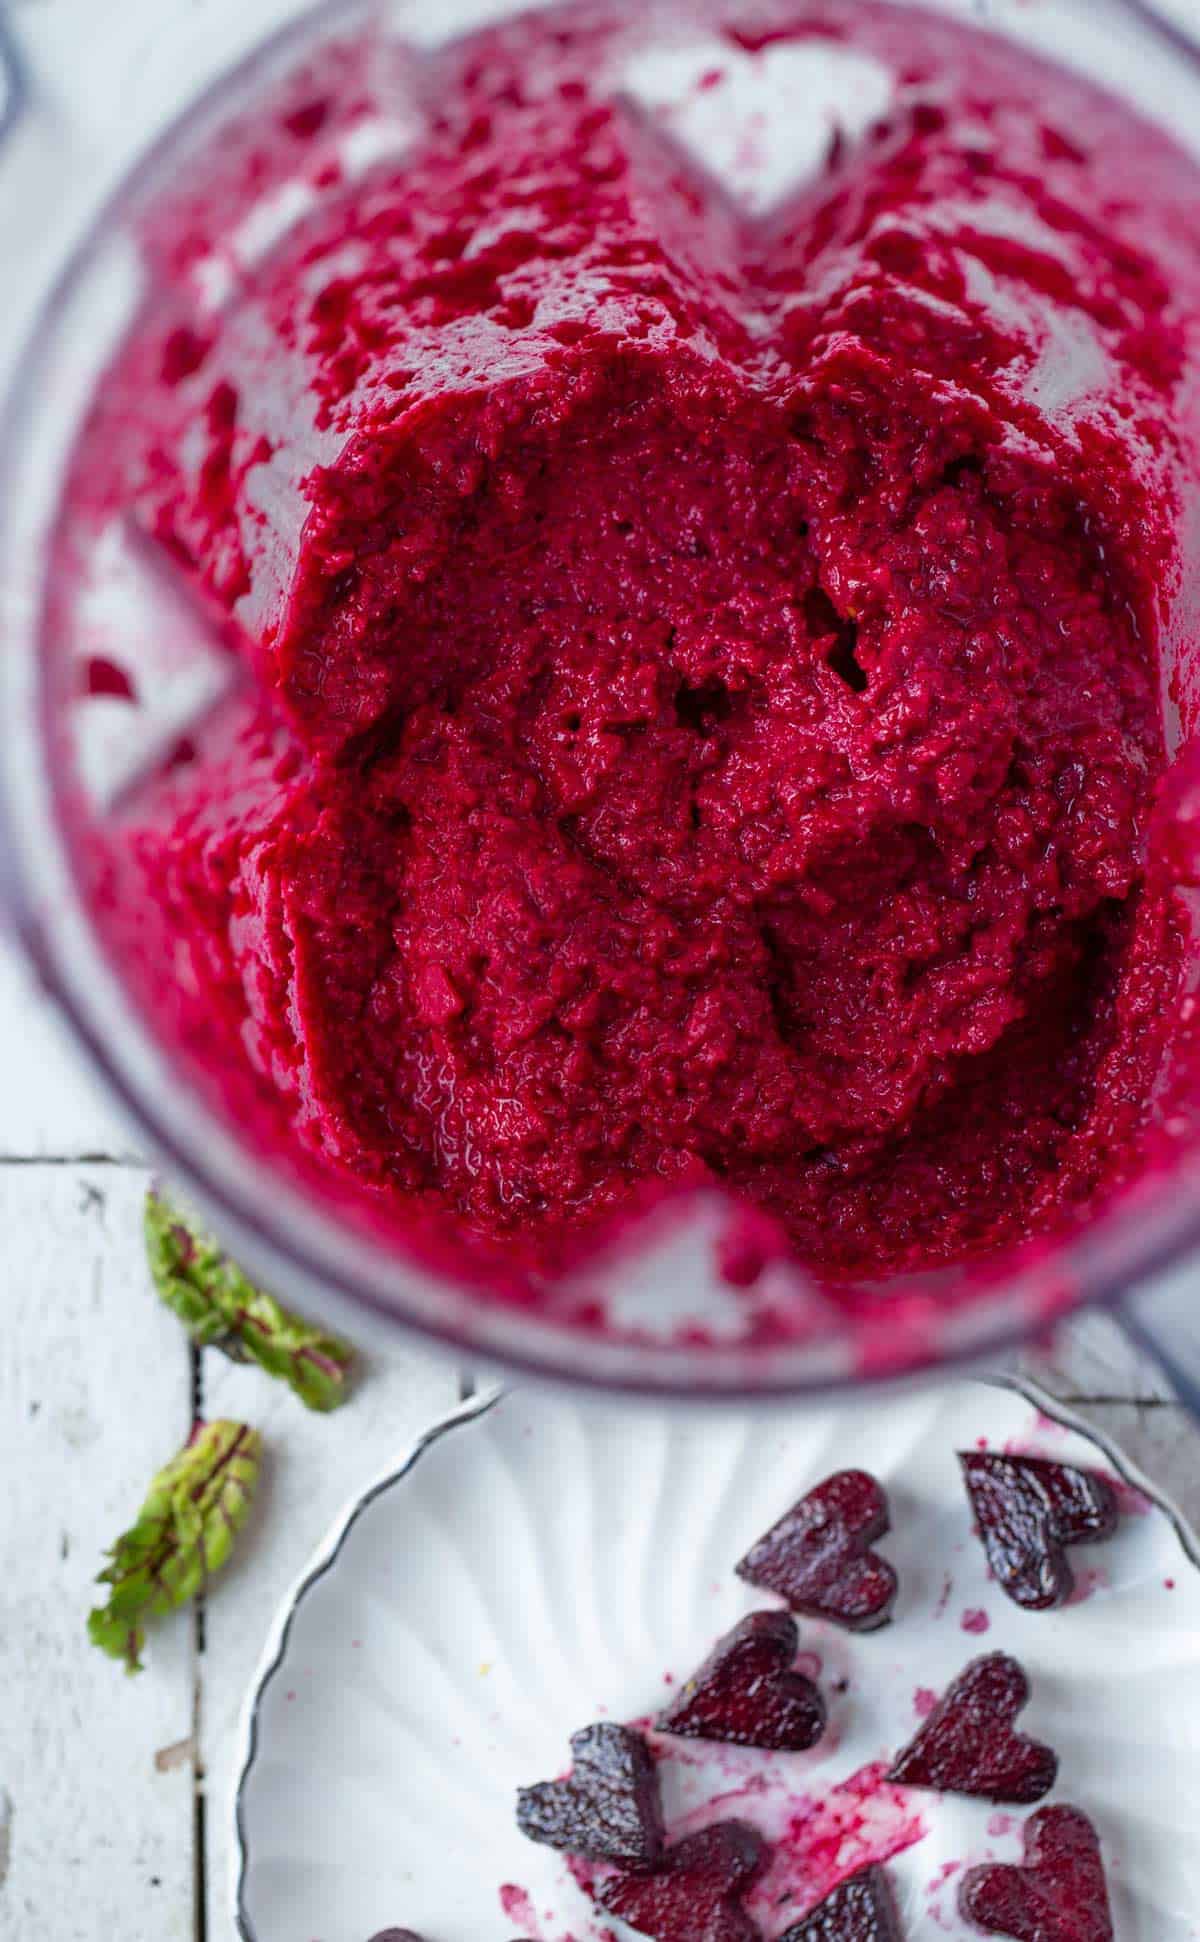 Pink Pesto 'Heart" Beet Pasta is a naturally bright pink pasta recipe made with balsamic roasted beets, beet greens and beetroot pesto. Valentine's day dinner idea | beet pasta | beetroot pesto | beet greens recipe | pink pasta | heart shaped foods